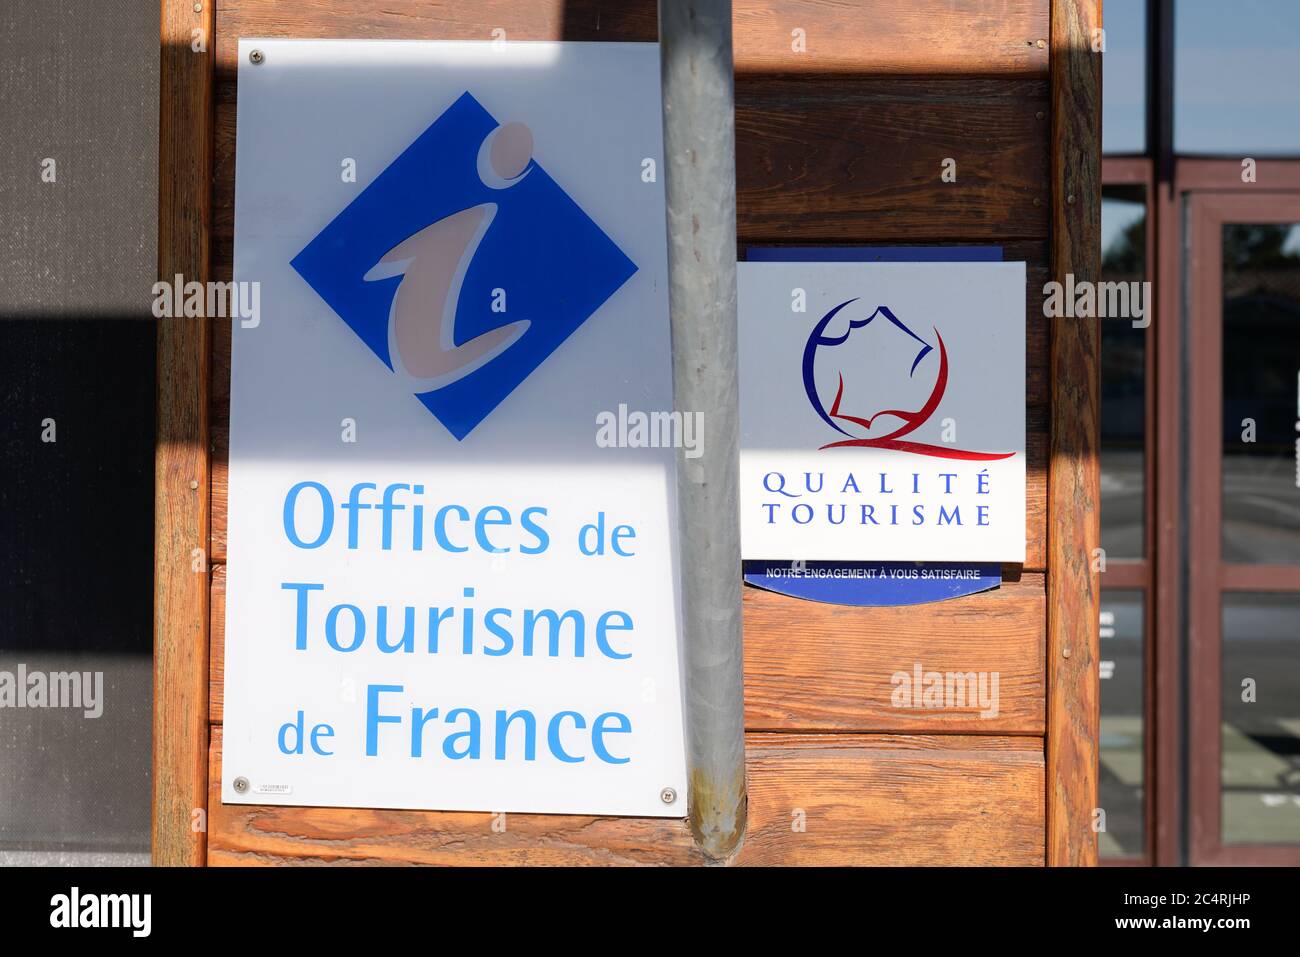 Bordeaux , Aquitaine / France - 06 20 2020 : office de tourisme sign and Qualite Tourisme logo of French agency and tourism office Stock Photo